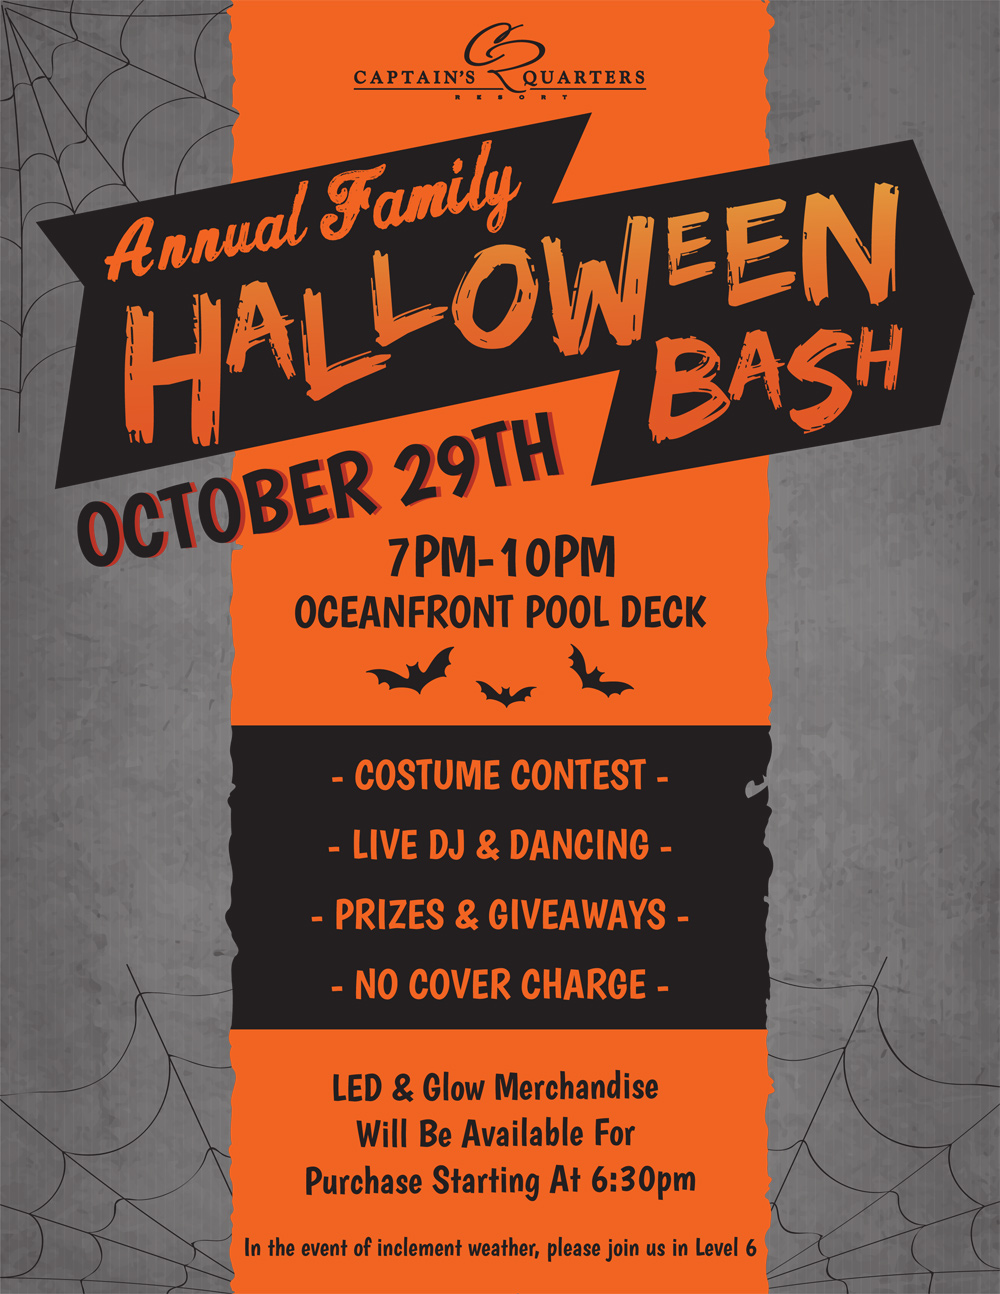 Captain's Quarters Resort Halloween Party in Myrtle Beach for families